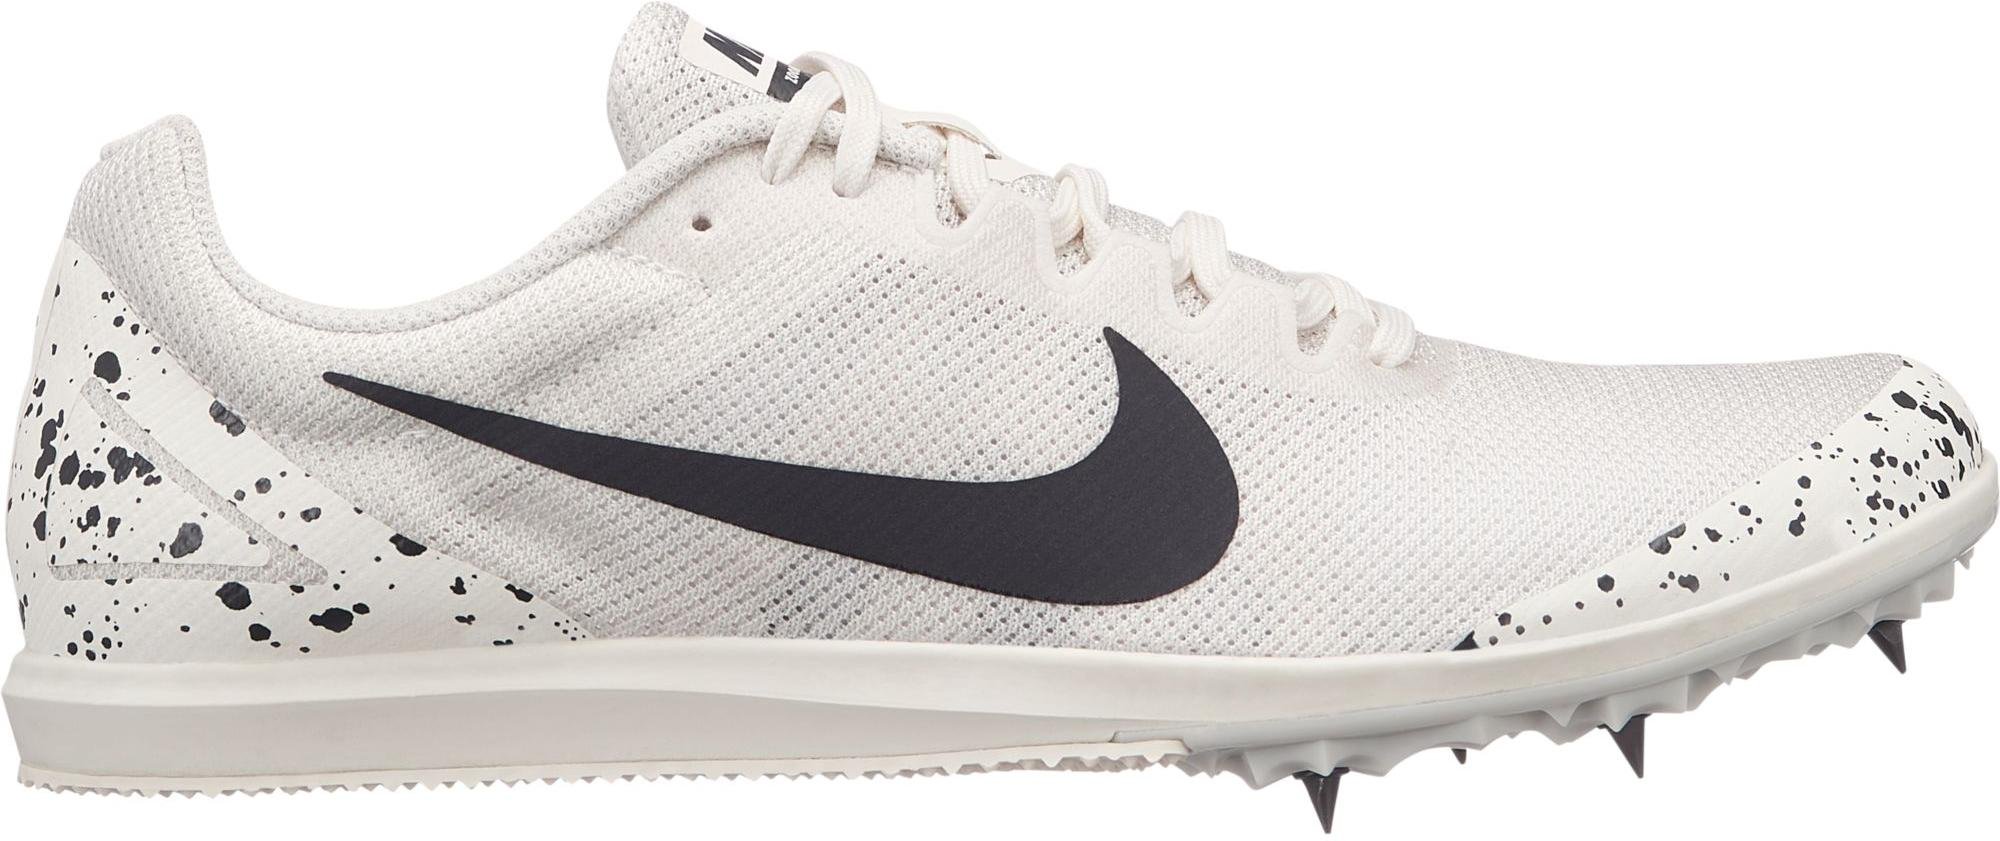 Spikes Nike WMNS ZOOM RIVAL D 10